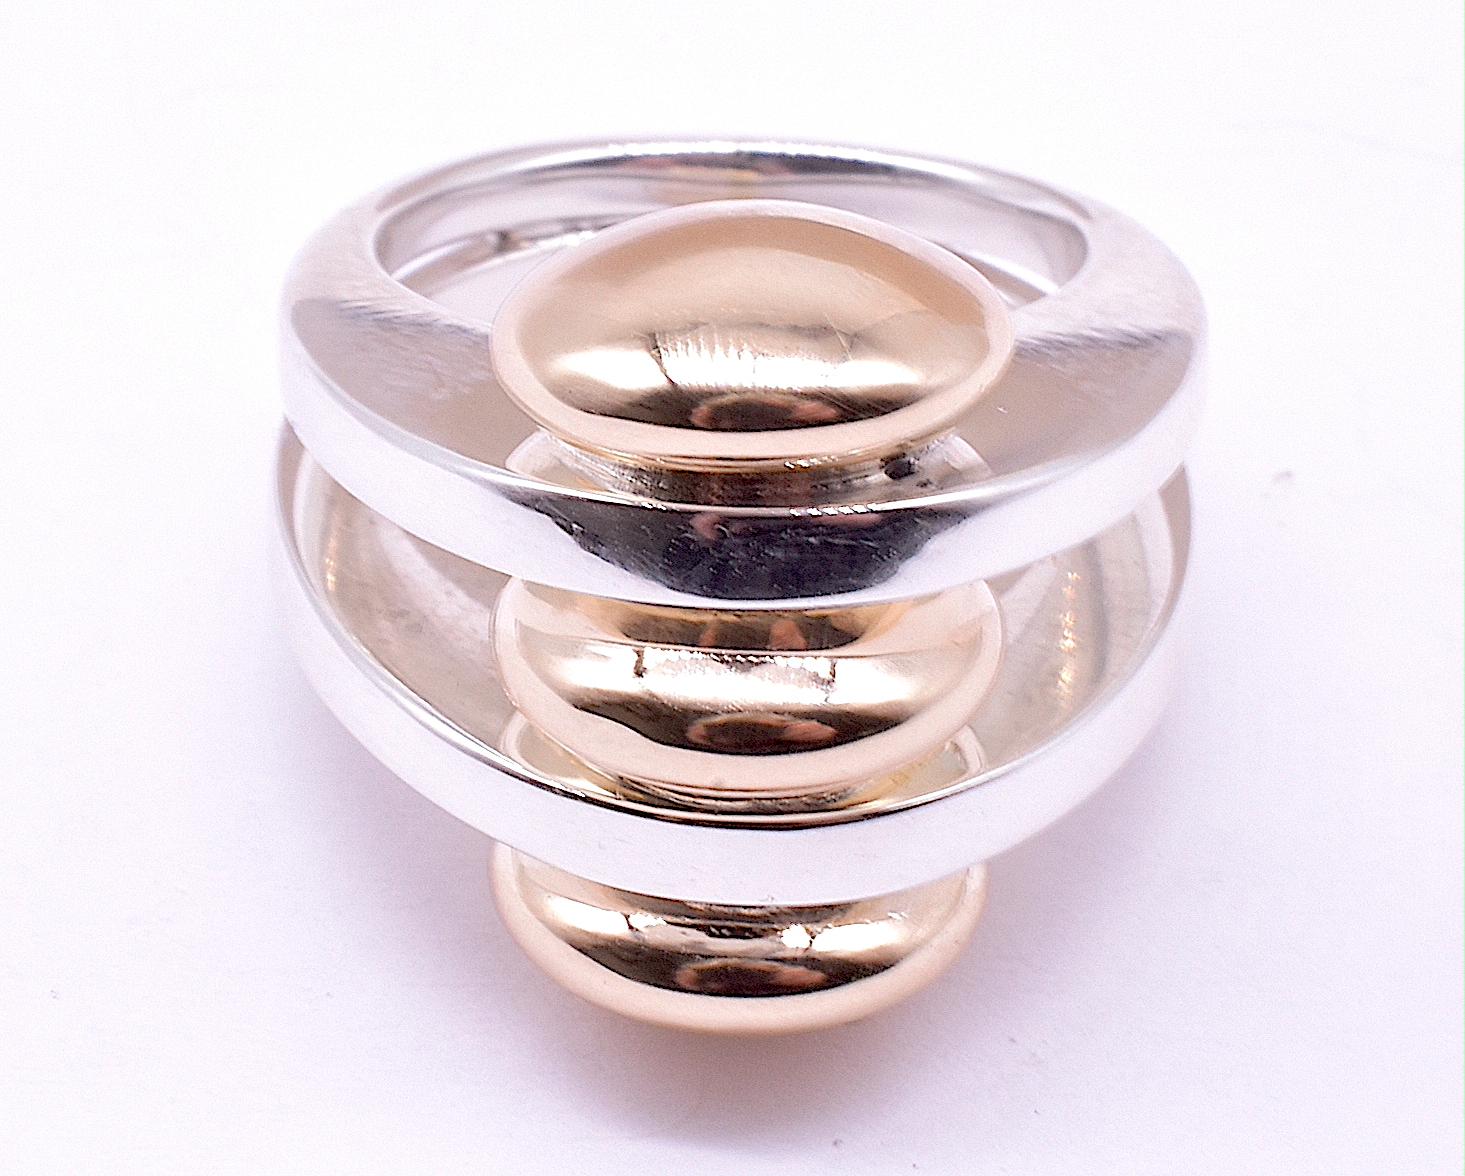 Modernist circles abound on this minimalist ring boldly signed PIERRE CARDIN. Constructed entirely of silver and gold, no matter what other jewelry you are wearing, this ring goes with it all. The ring has three gold half rounds discs on top of,